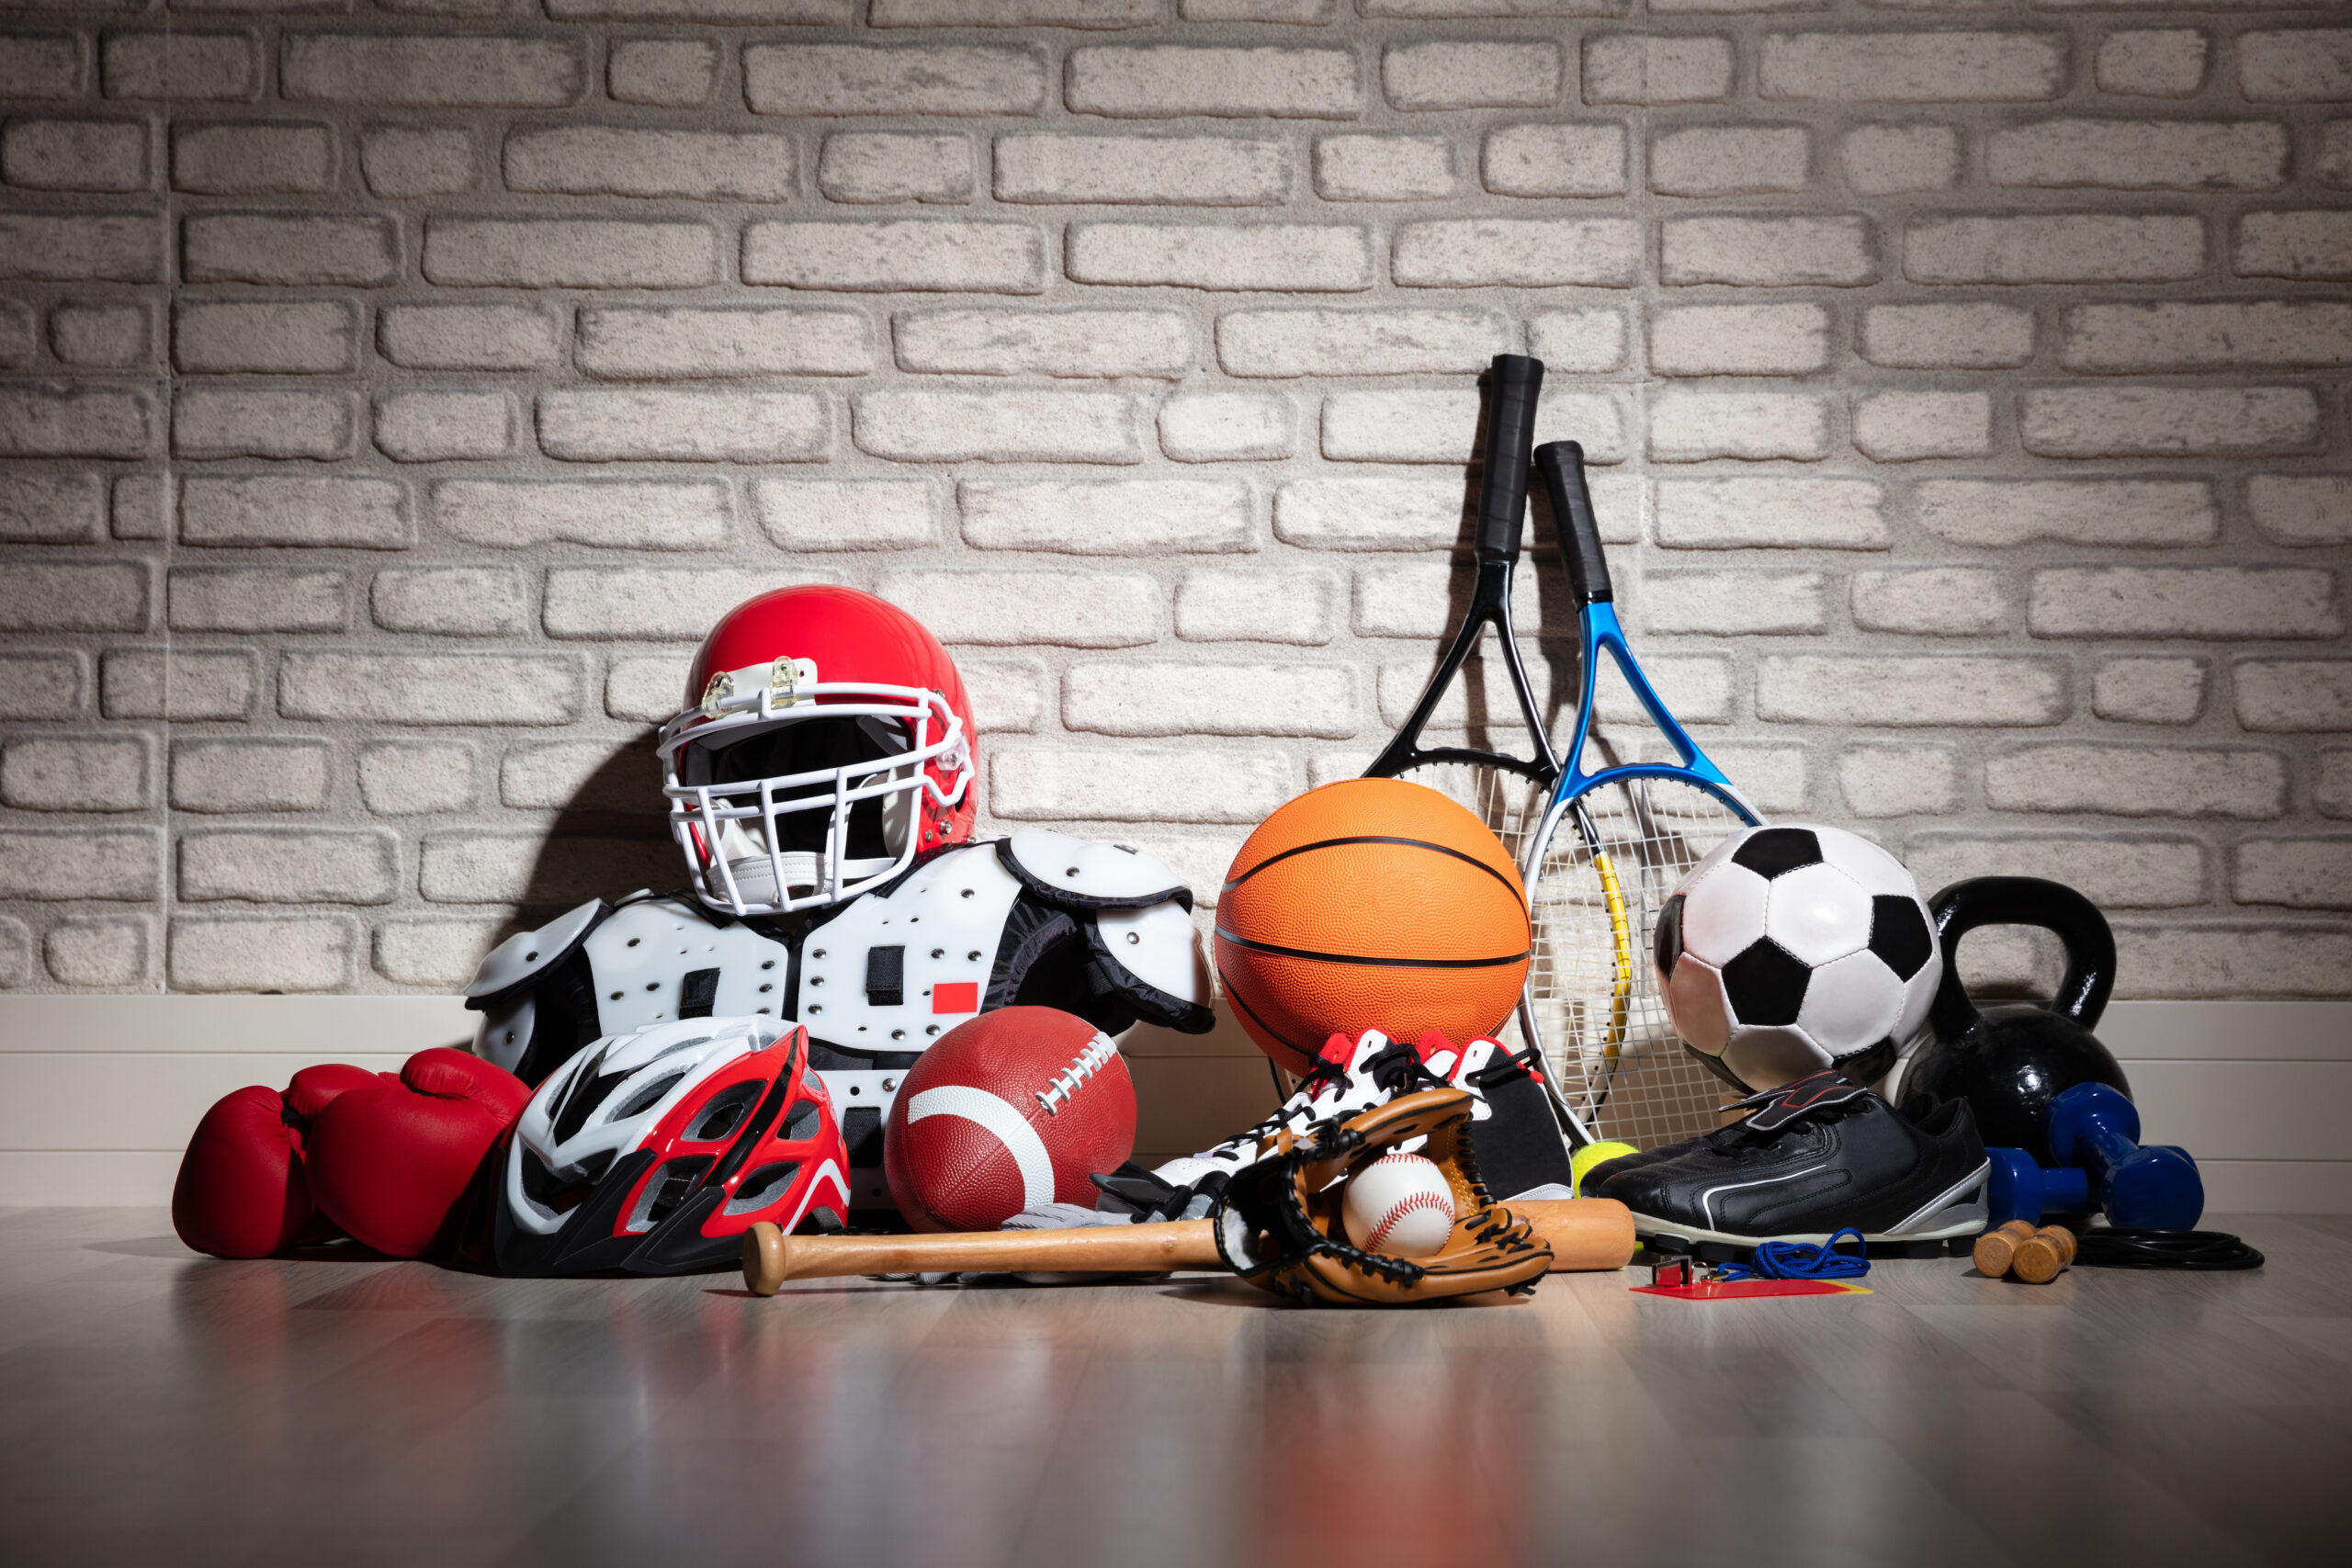 Assorted sporting equipment from various different games is seen stacked in a pile on the floor, against a grey brick wall.